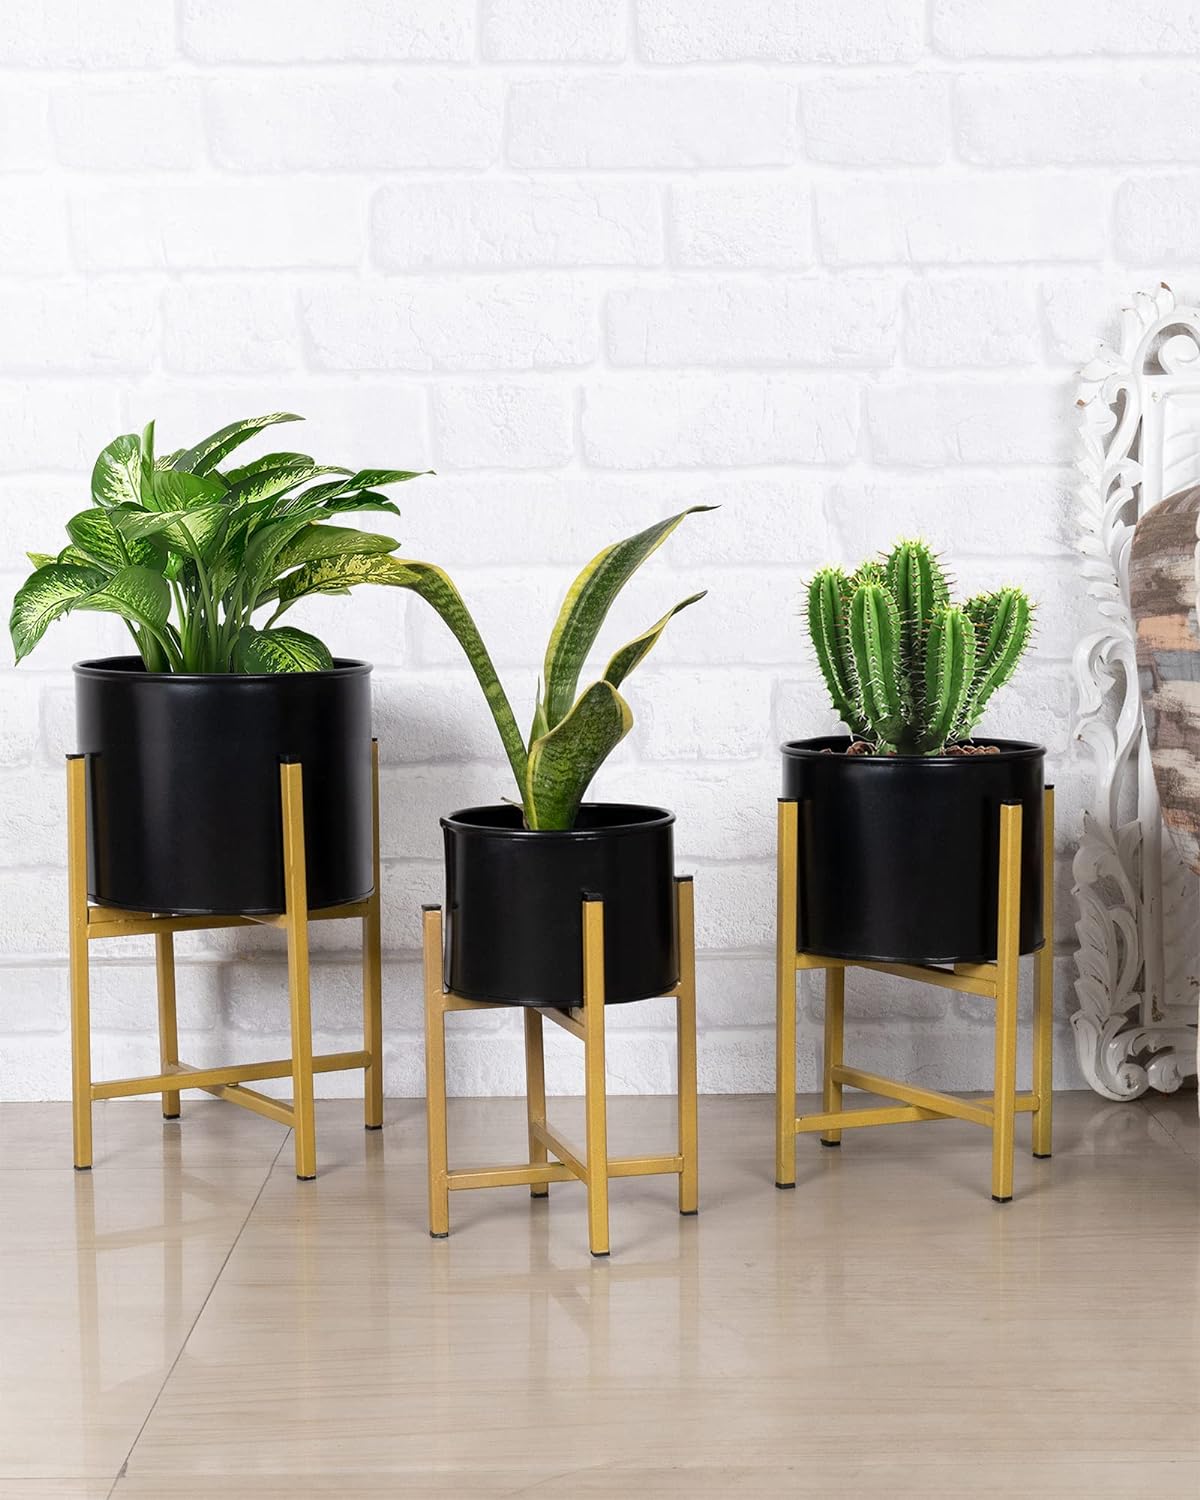 Mid Century Planters with Metal Stand (Set of 3) - Modern Decorative Plant Pot and Flower Holder with Iron Stand for Corner Display- Indoor Plant Stand for Home Decor, Golden